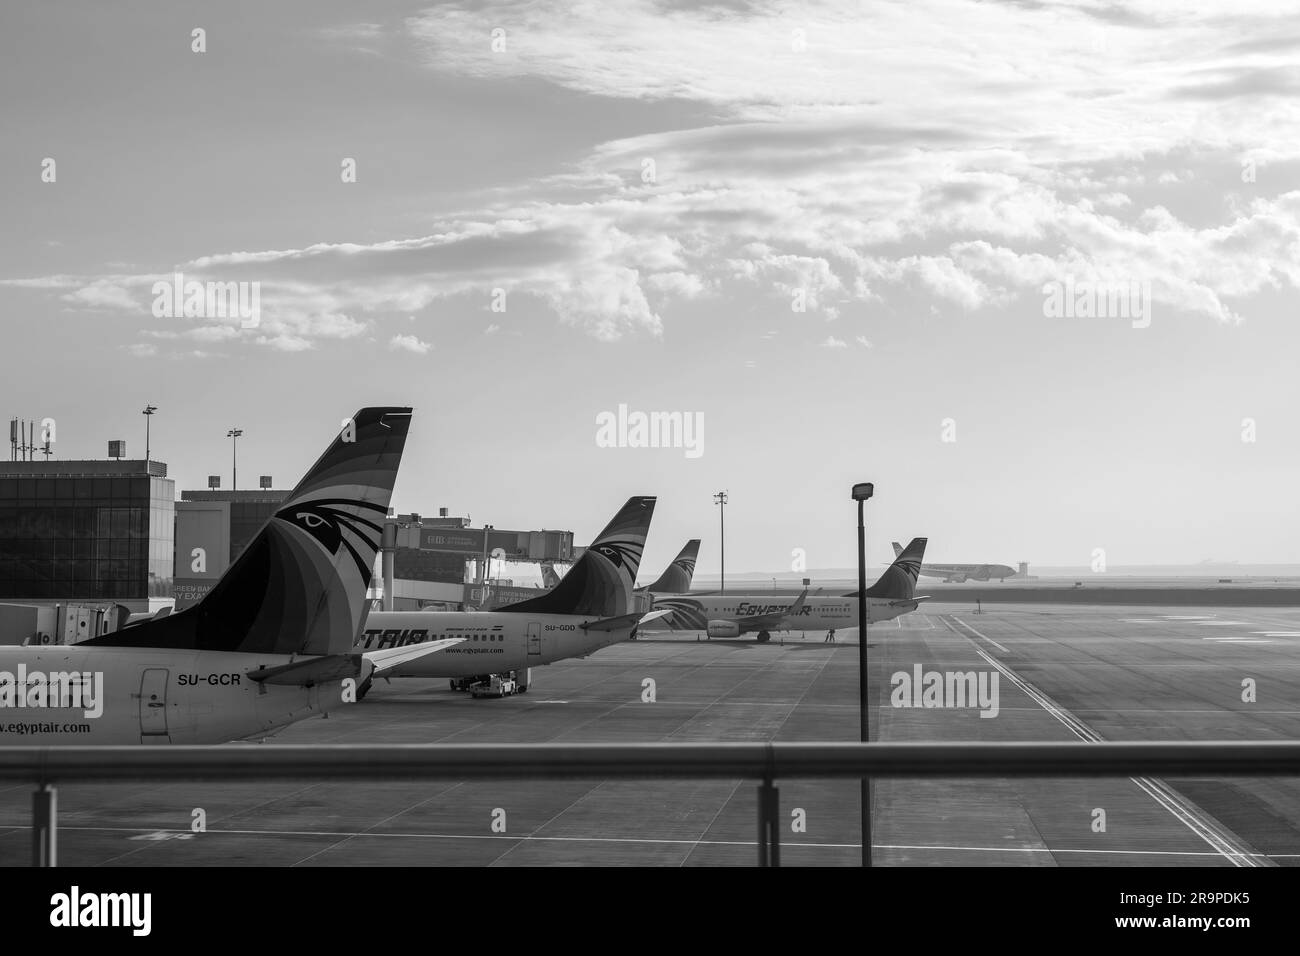 Cairo, Egypt: 1-25-2023: Egyptair planes at an airport Stock Photo